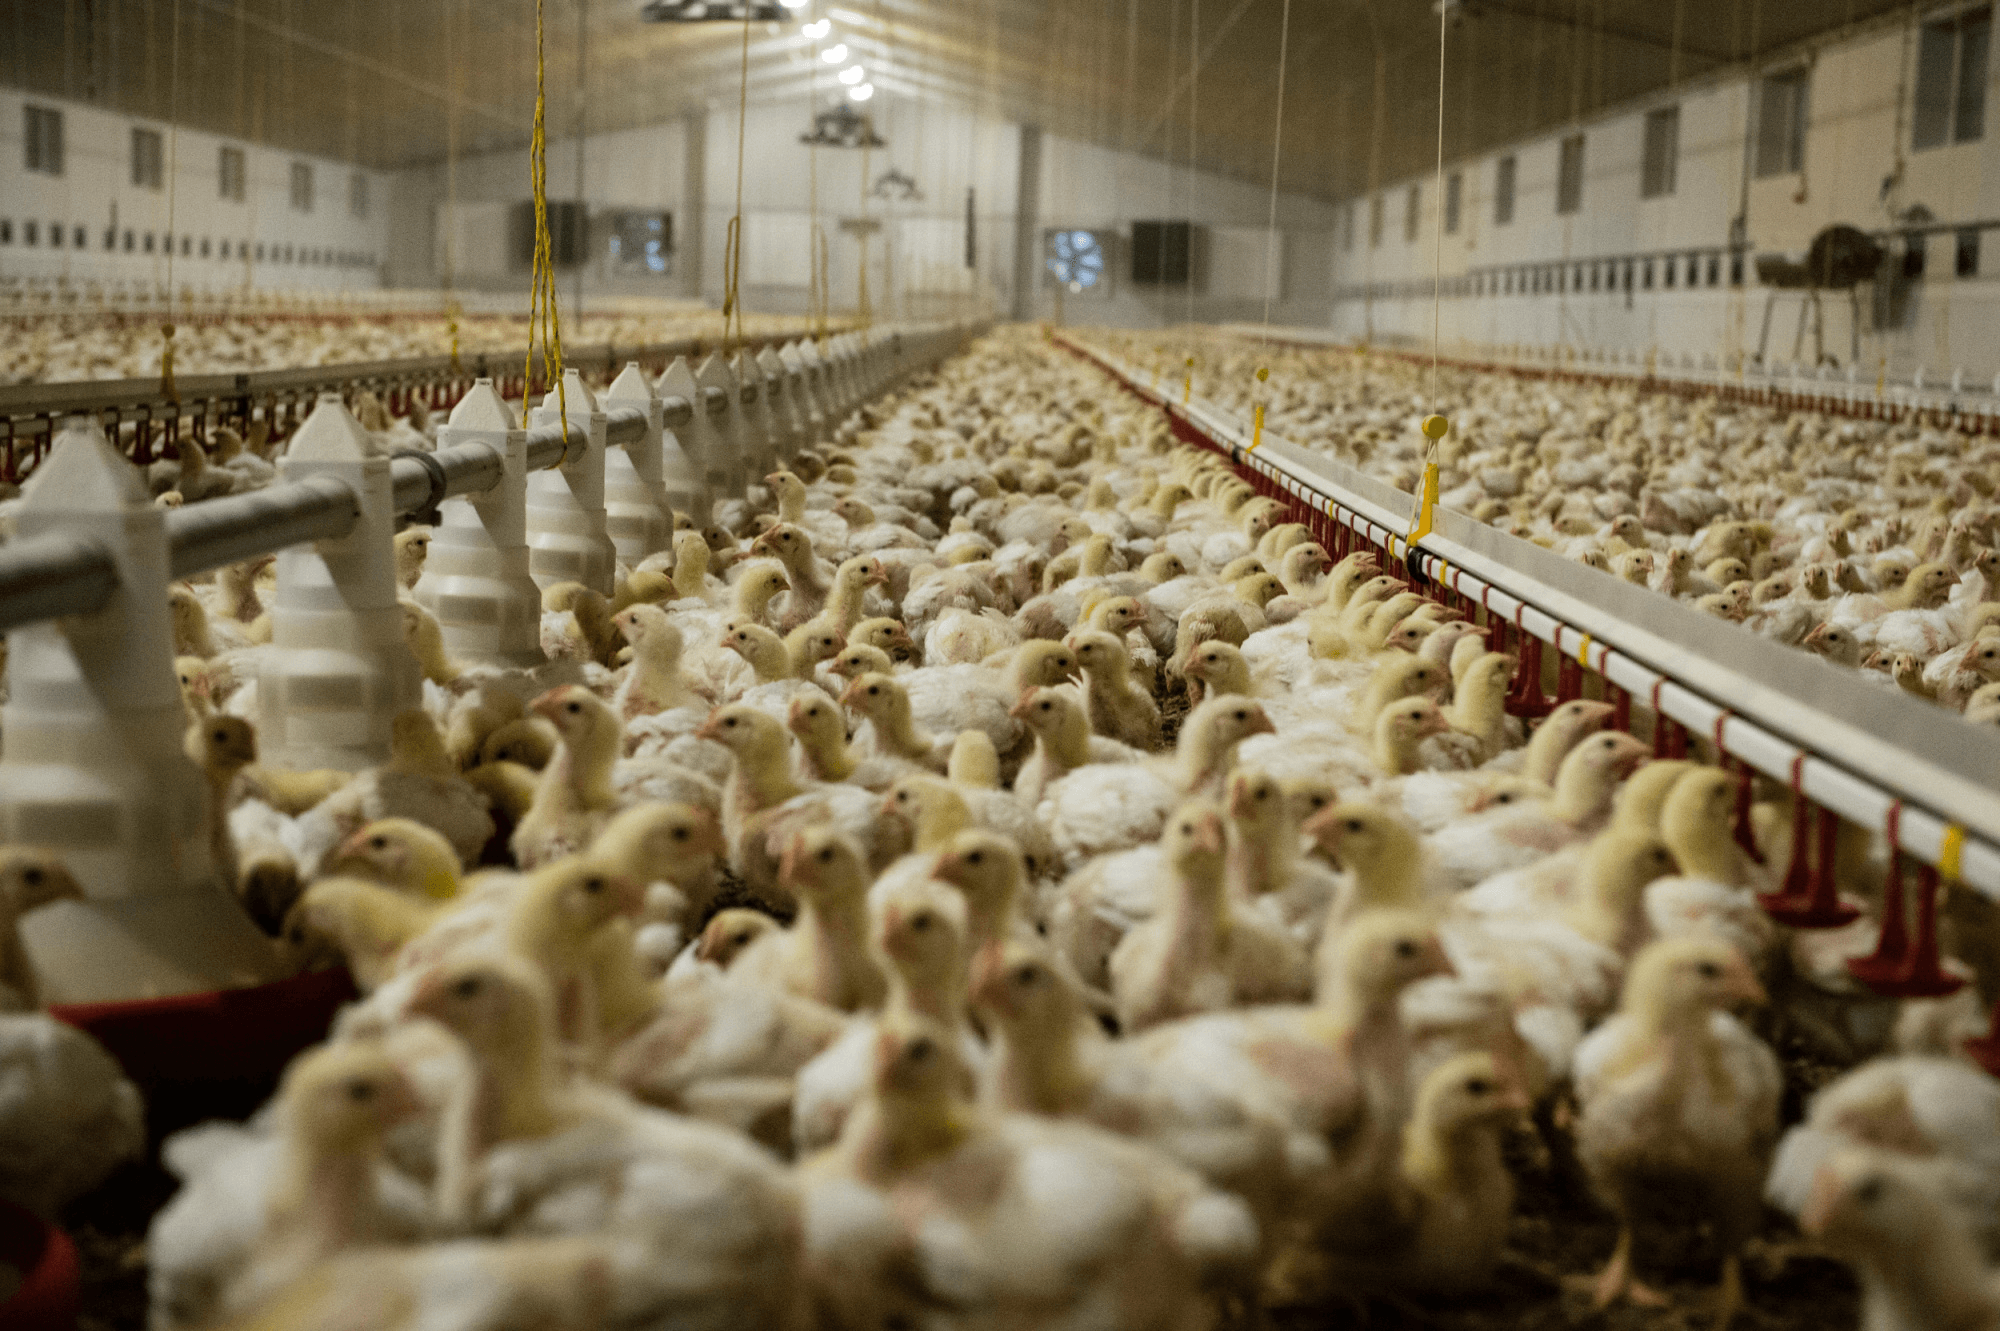 Animal welfare: Chicken and other poultry